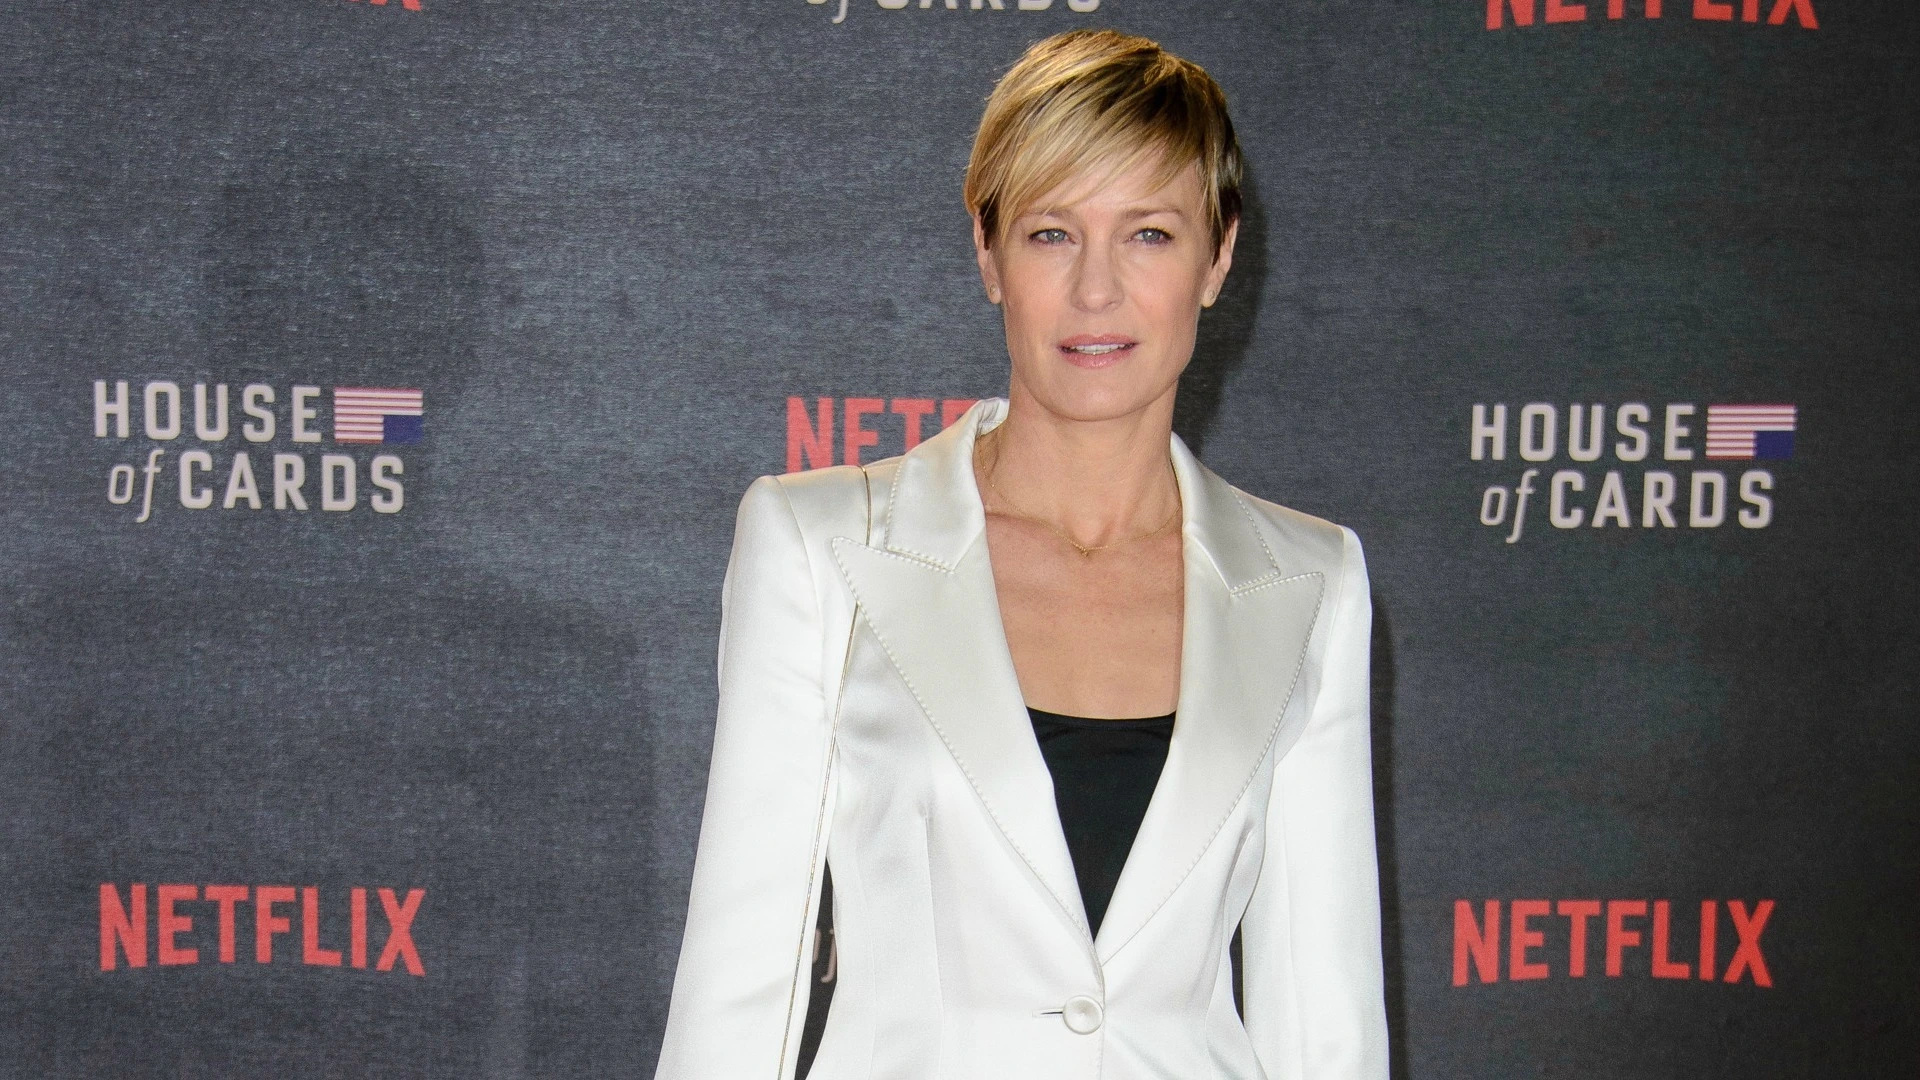 Robin Wright, Furious, Threaten House of Cards, Equal pay, 1920x1080 Full HD Desktop